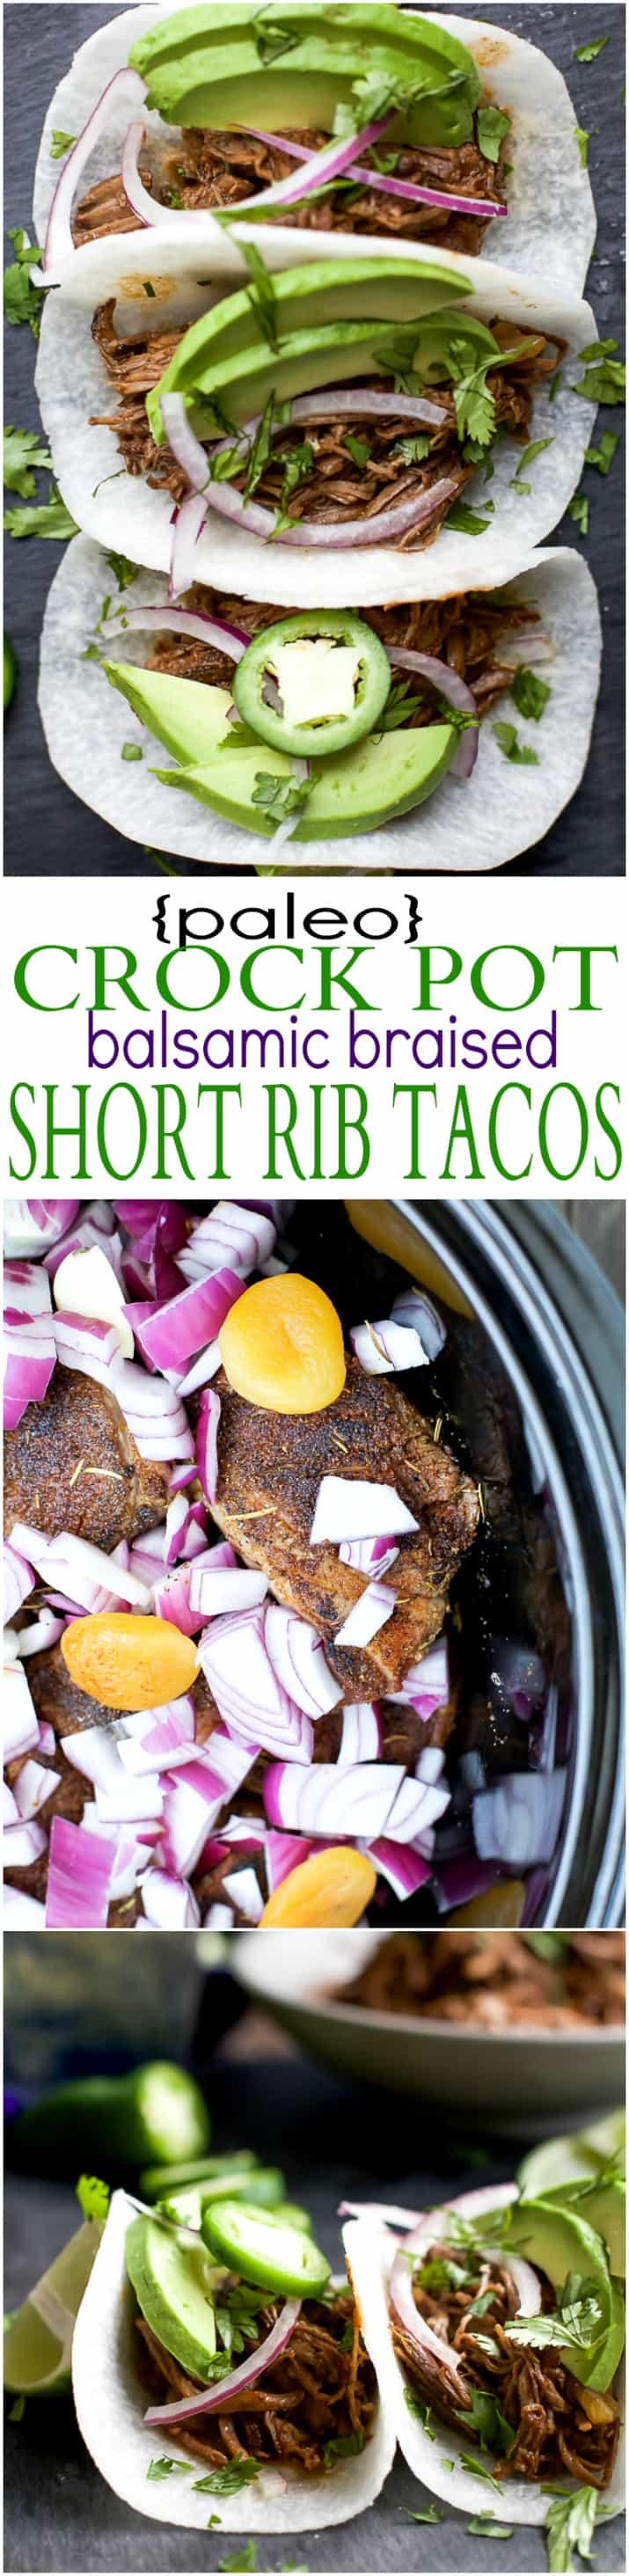 These Paleo Crock Pot Balsamic Braised Short Rib Tacos will be your new favorite Crock Pot recipe! Cuz Tacos... duh! They are sweet & spicy, easy, healthy, and totally deliver on flavor! You're gonna be in love! | joyfulhealthyeats.com #glutenfree